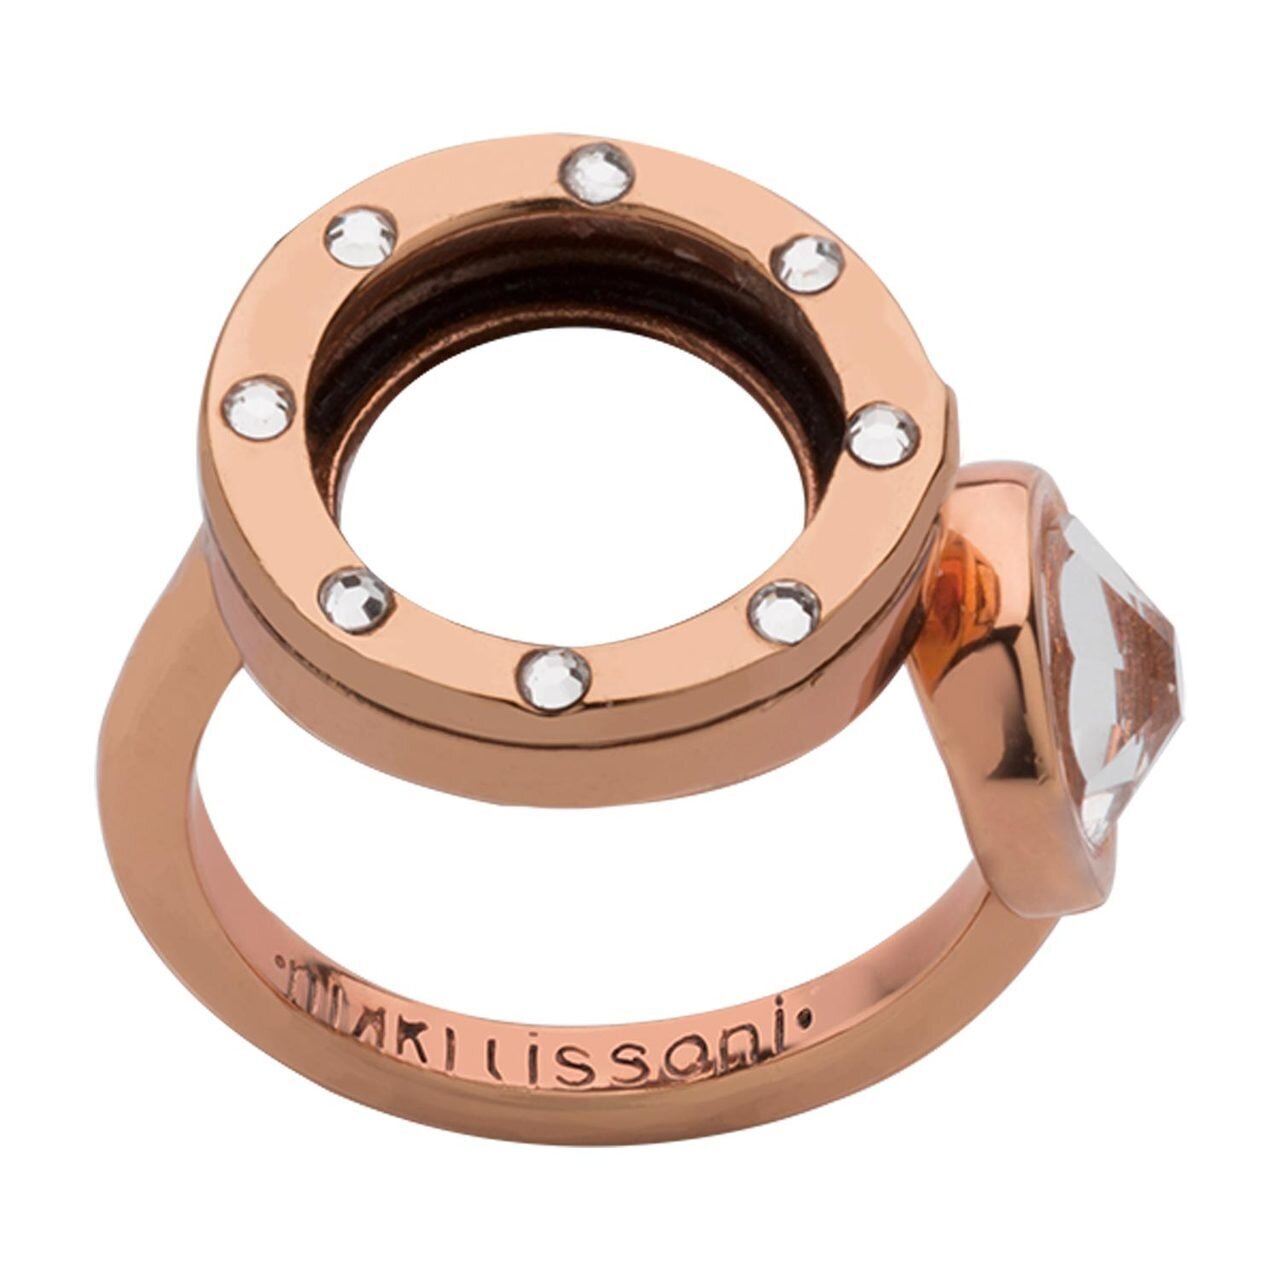 Nikki Lissoni Interchangeable Open Ring with Swarovski Stones Rose Gold-plated Size 10 R1006RG10